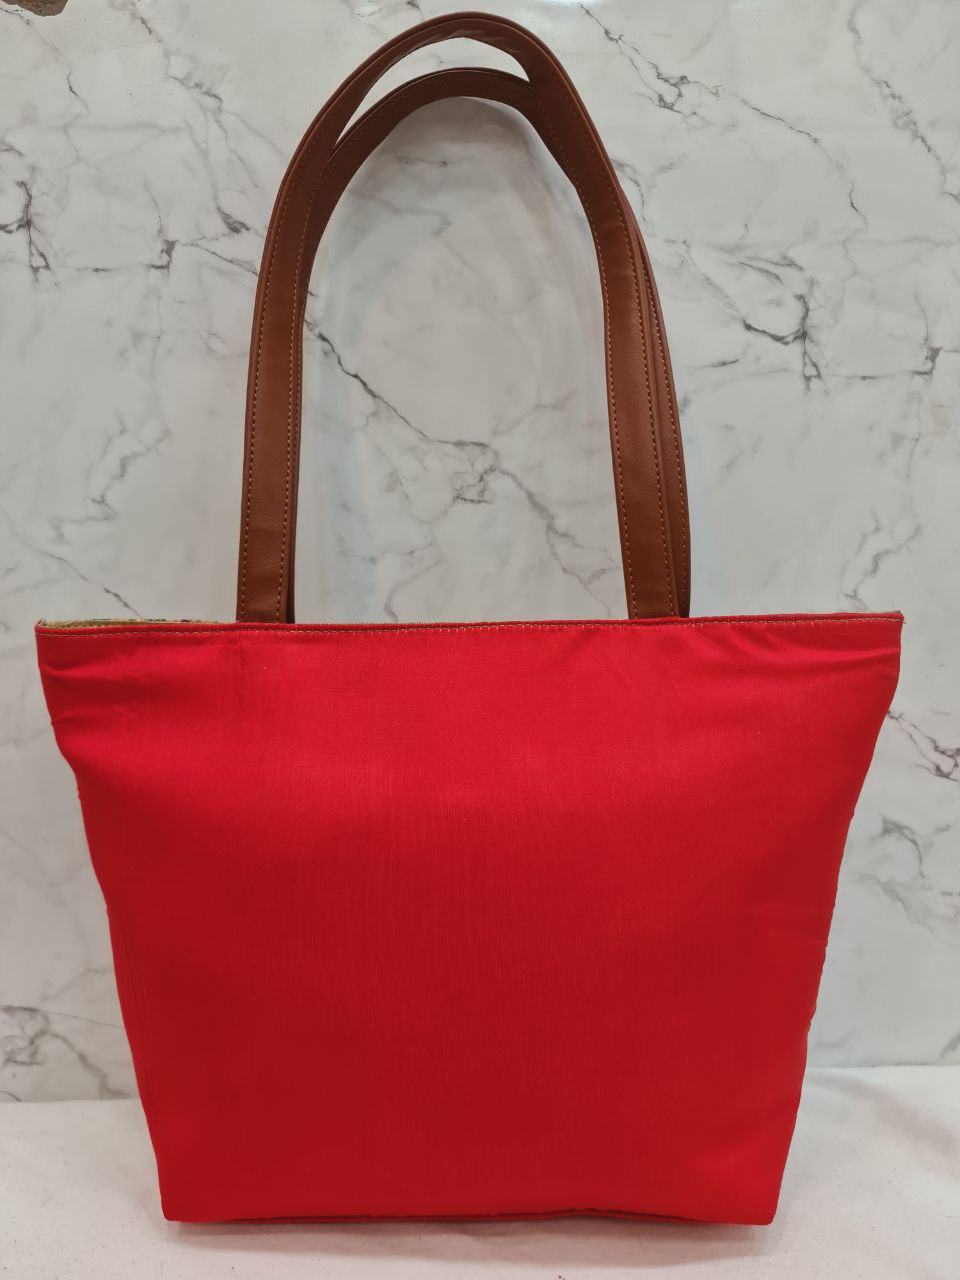 Tote Bag for Women PU Leather Shoulder Bags Fashion India | Ubuy